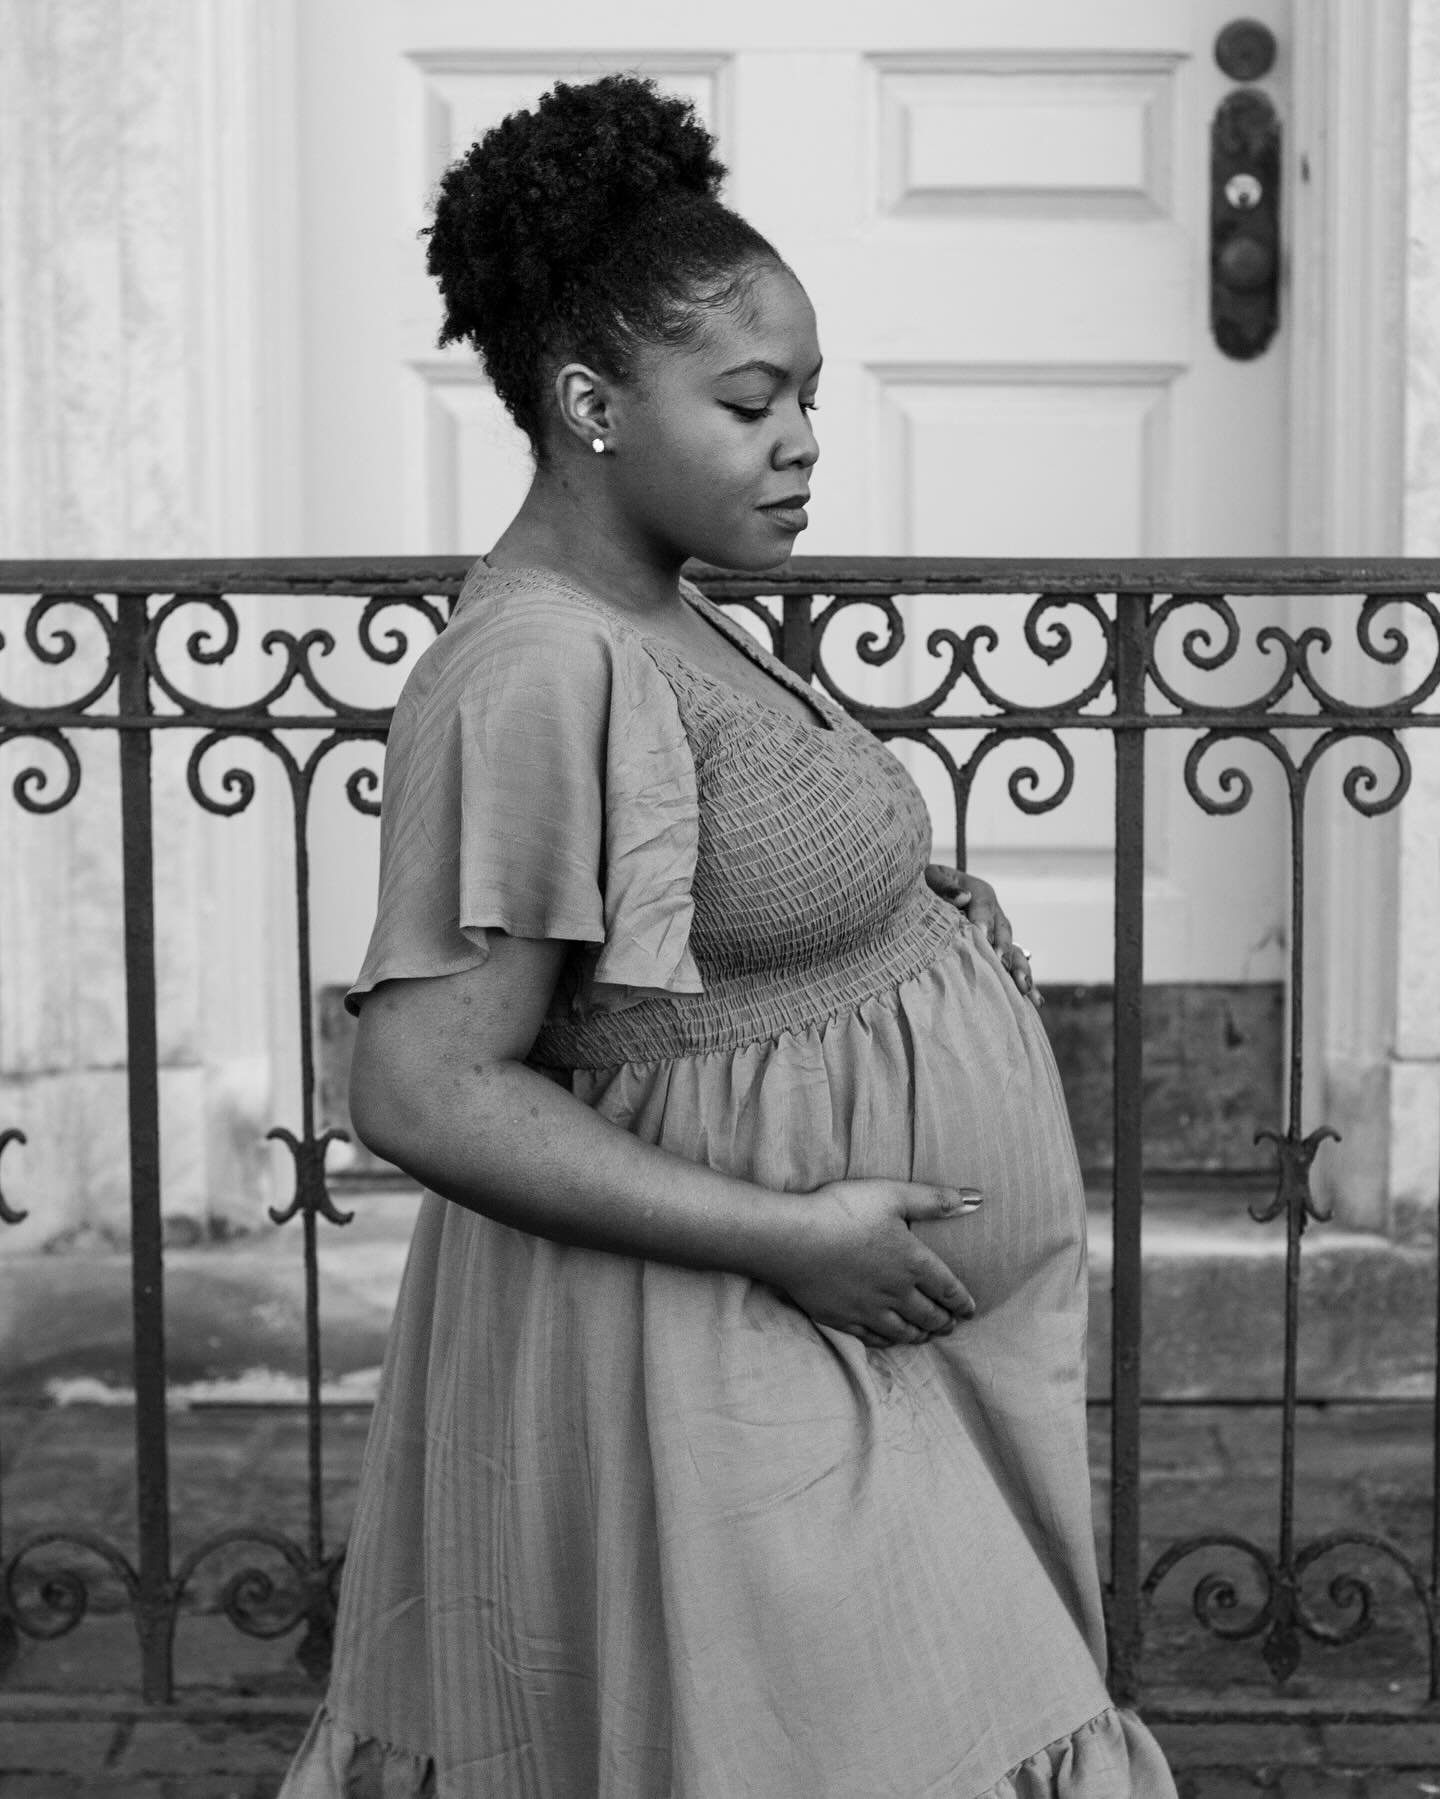 Sometimes I just can&rsquo;t get over how much I love black and white images! 🖤🤍 Just absolutely stunning! 😍 #momentswithmegan #lovewhatido #blackandwhite #blackandwhitephotography #maternityphotographer #virginiafineartmuseum #richmondva